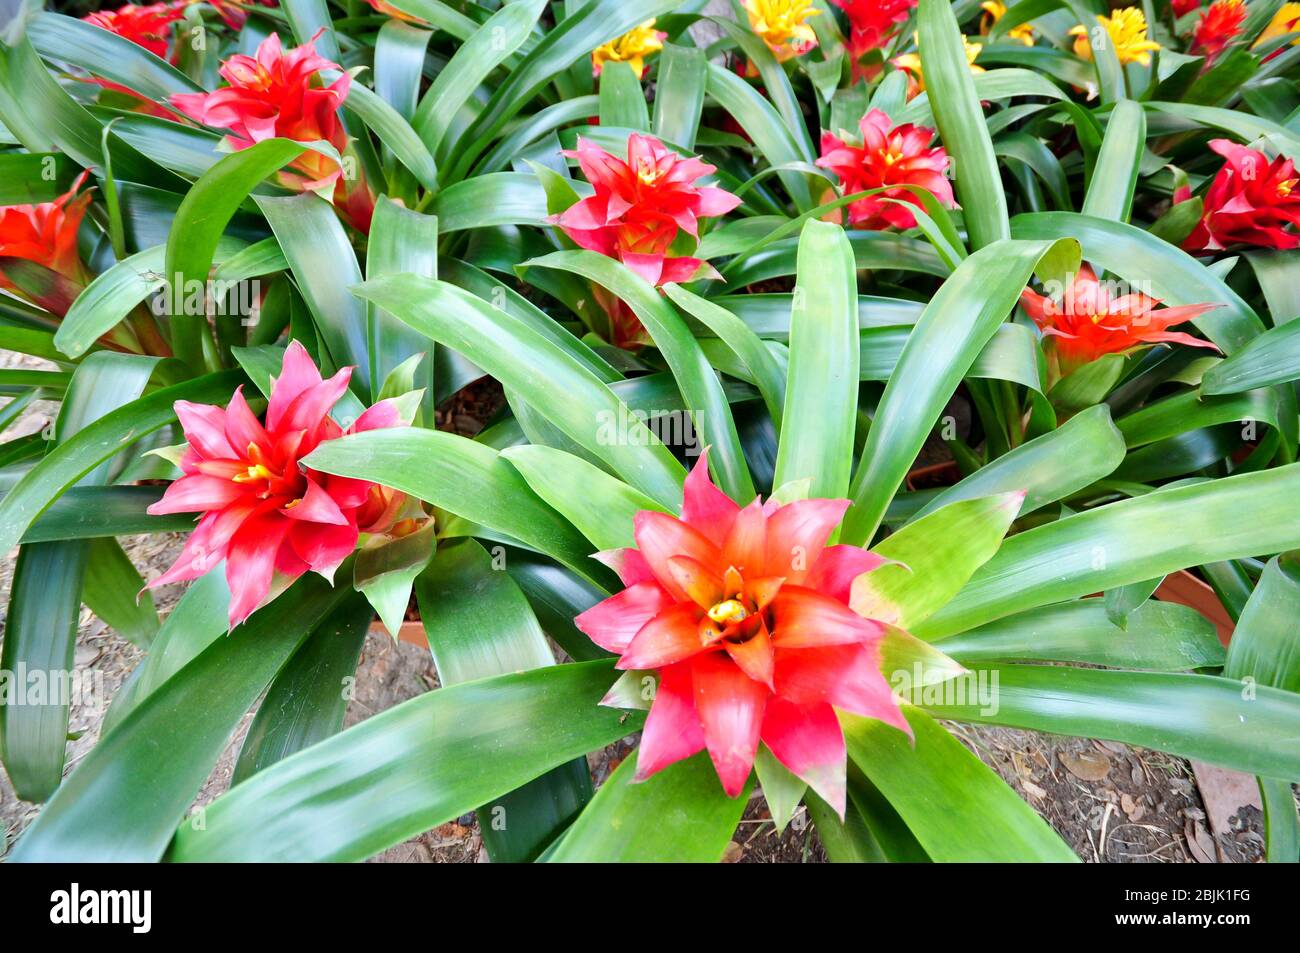 Group of red bromeliads Stock Photo